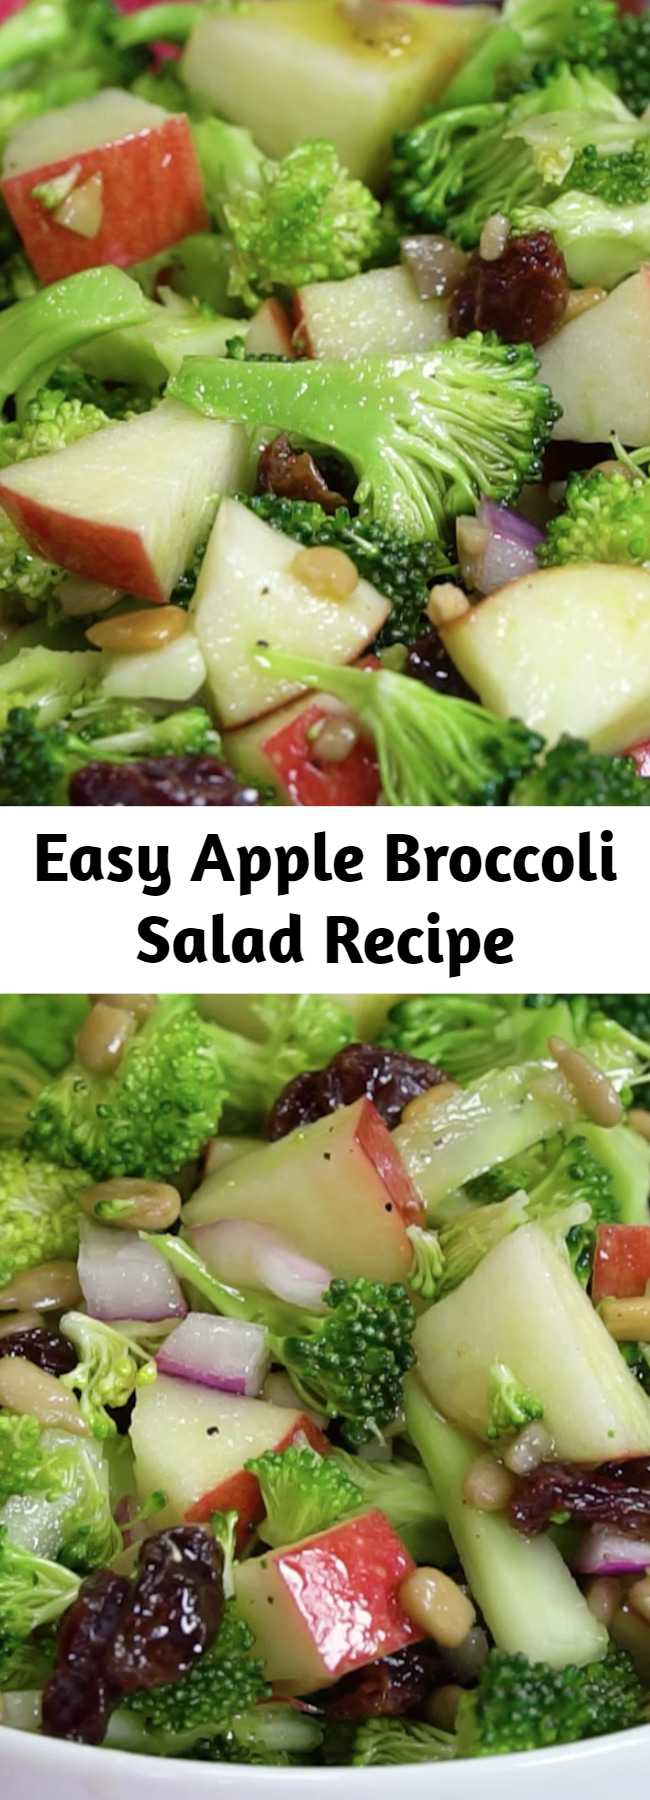 Easy Apple Broccoli Salad Recipe - Vegan Apple Broccoli Salad has everyone's favorite vegetables and fruits with a slightly sweet and tangy dressing. Easy, Healthy broccoli salad with raisins, apples and no mayo.